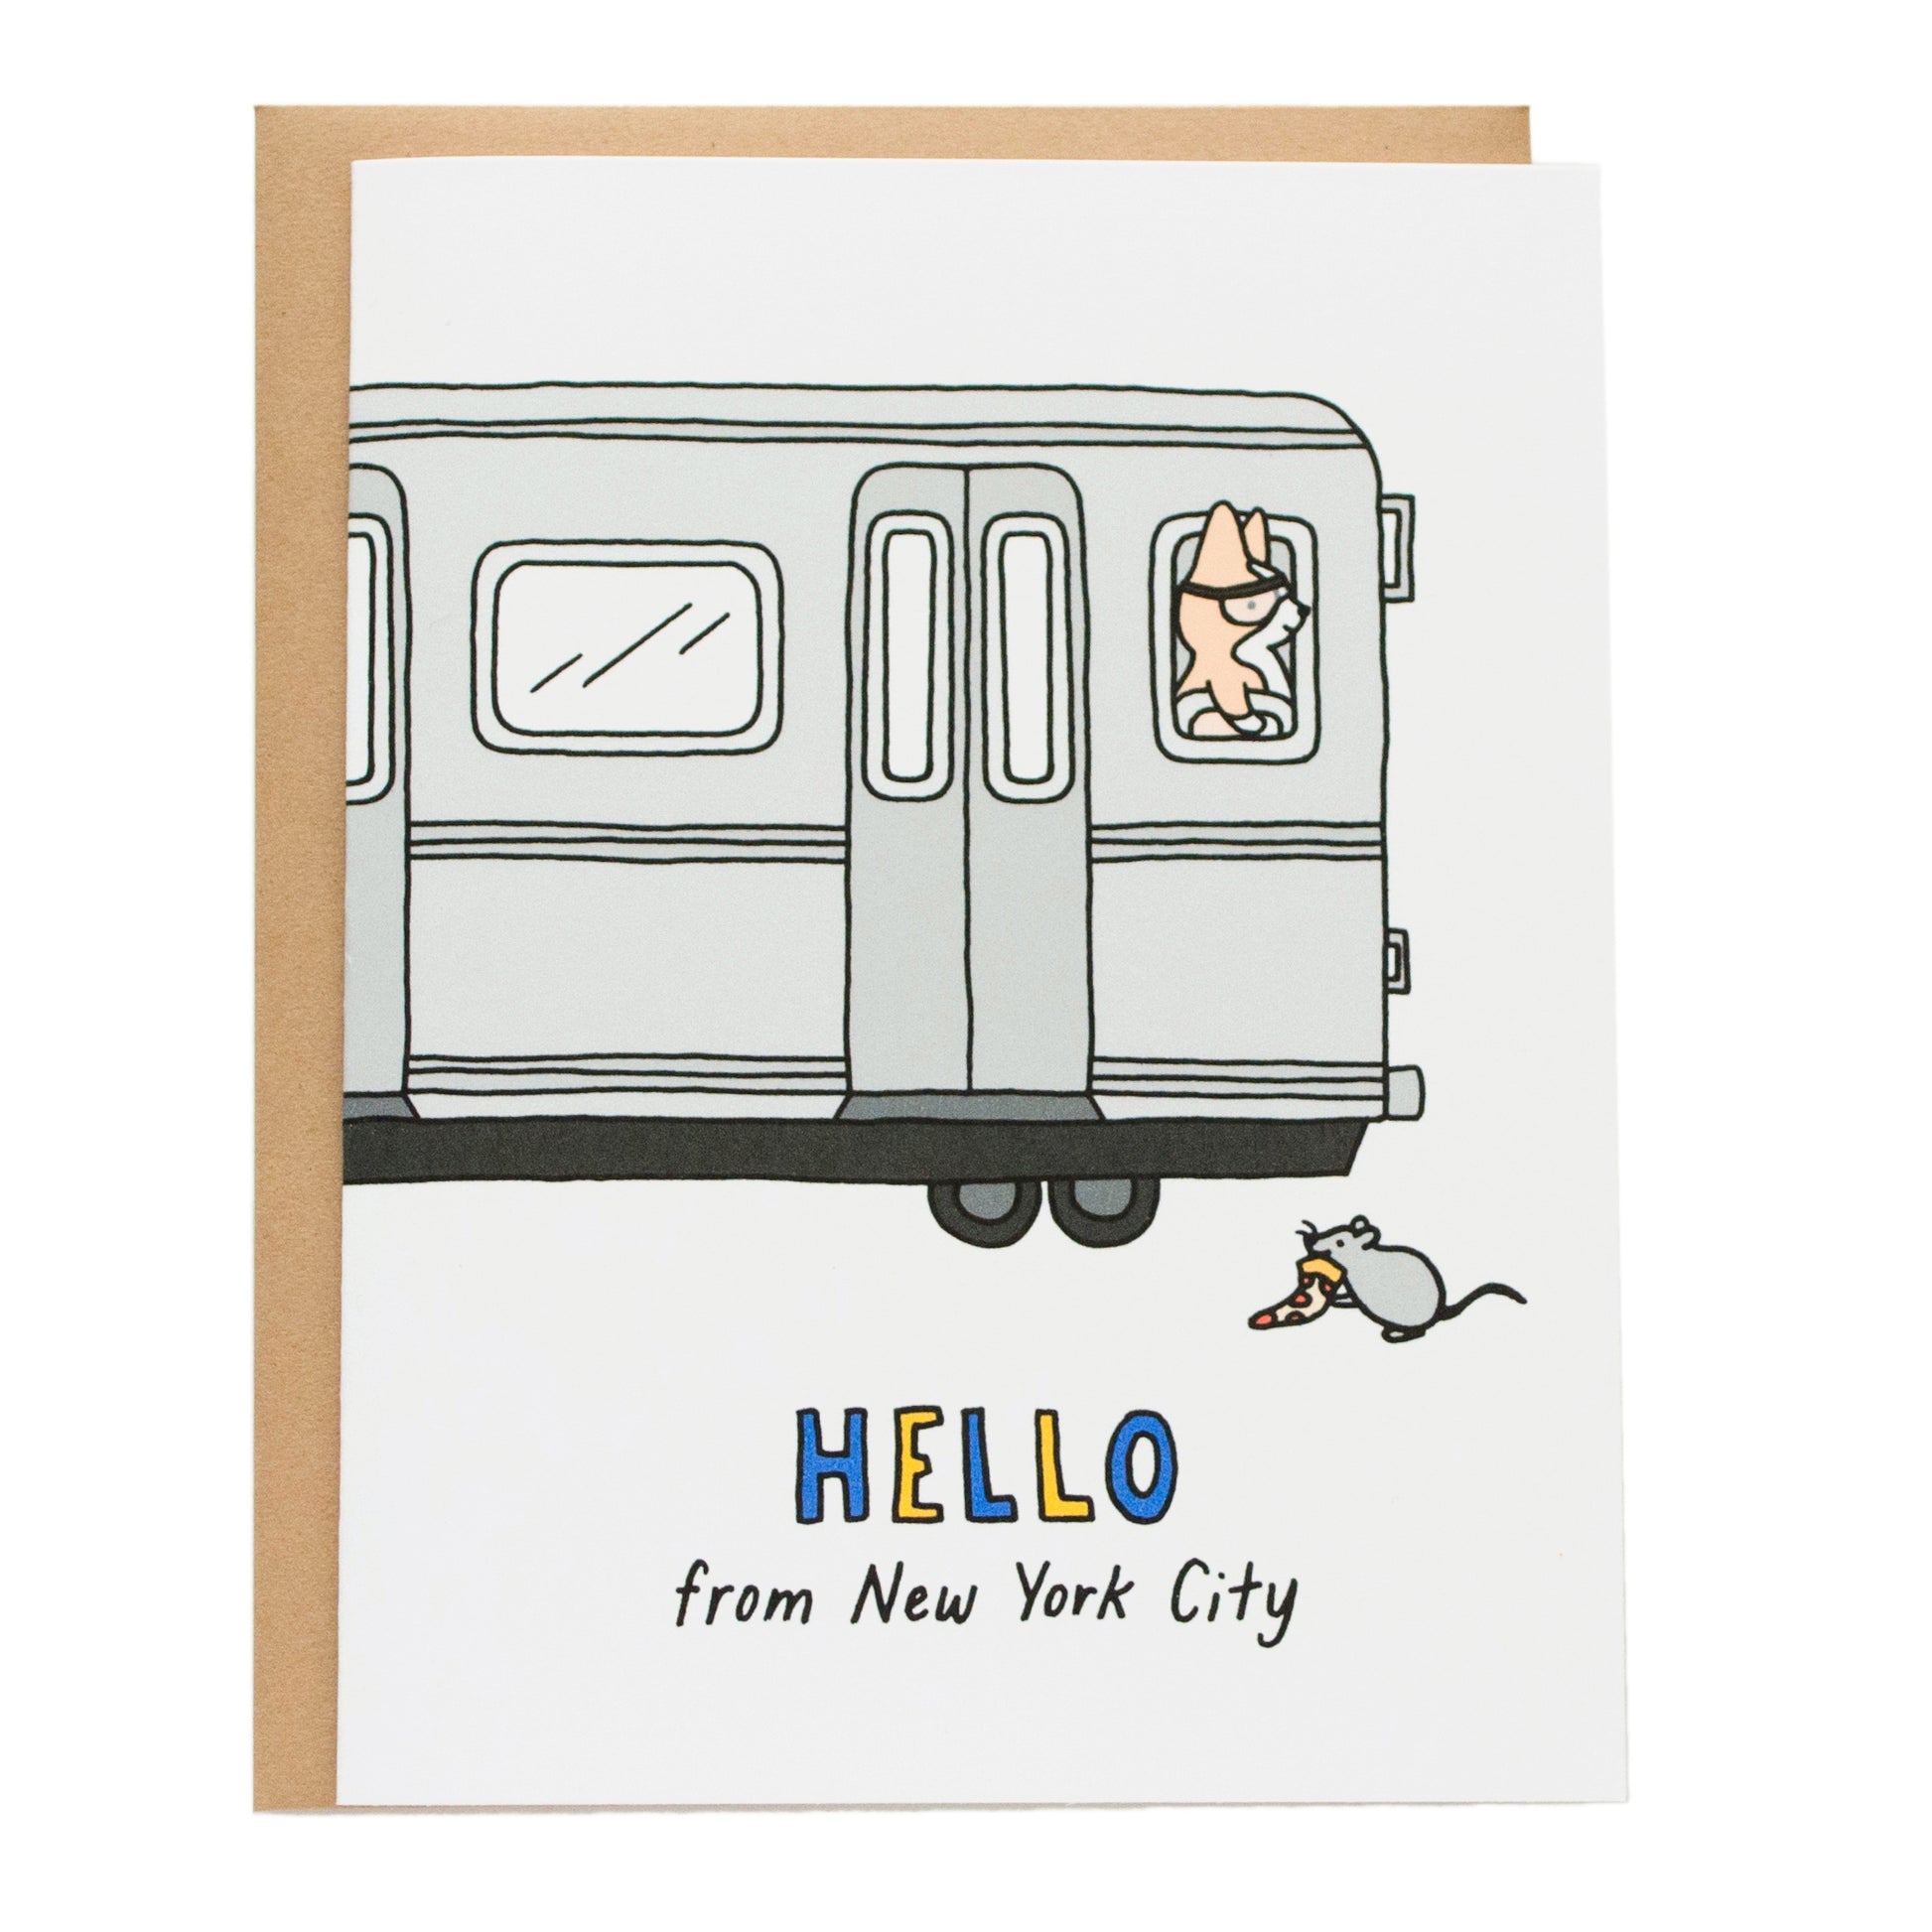 new york city inspired drawing of a corgi train/subway conductor and iconic pizza rat, card reads: hello from new york city